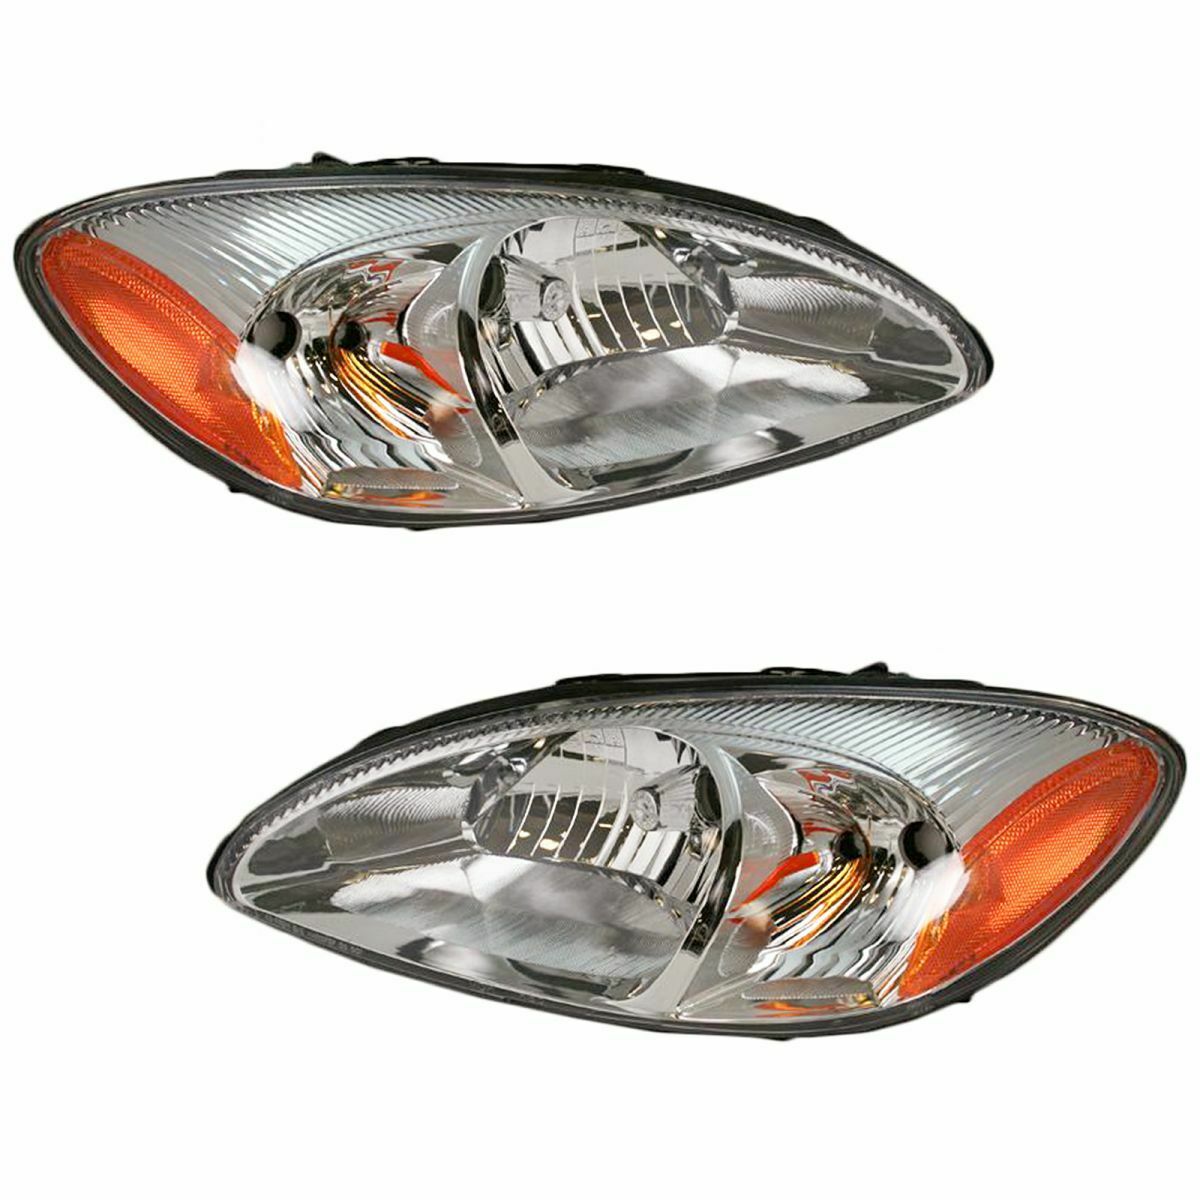 Newmar Kountry Star Replacement Headlight Assembly Pair (Left & Right)